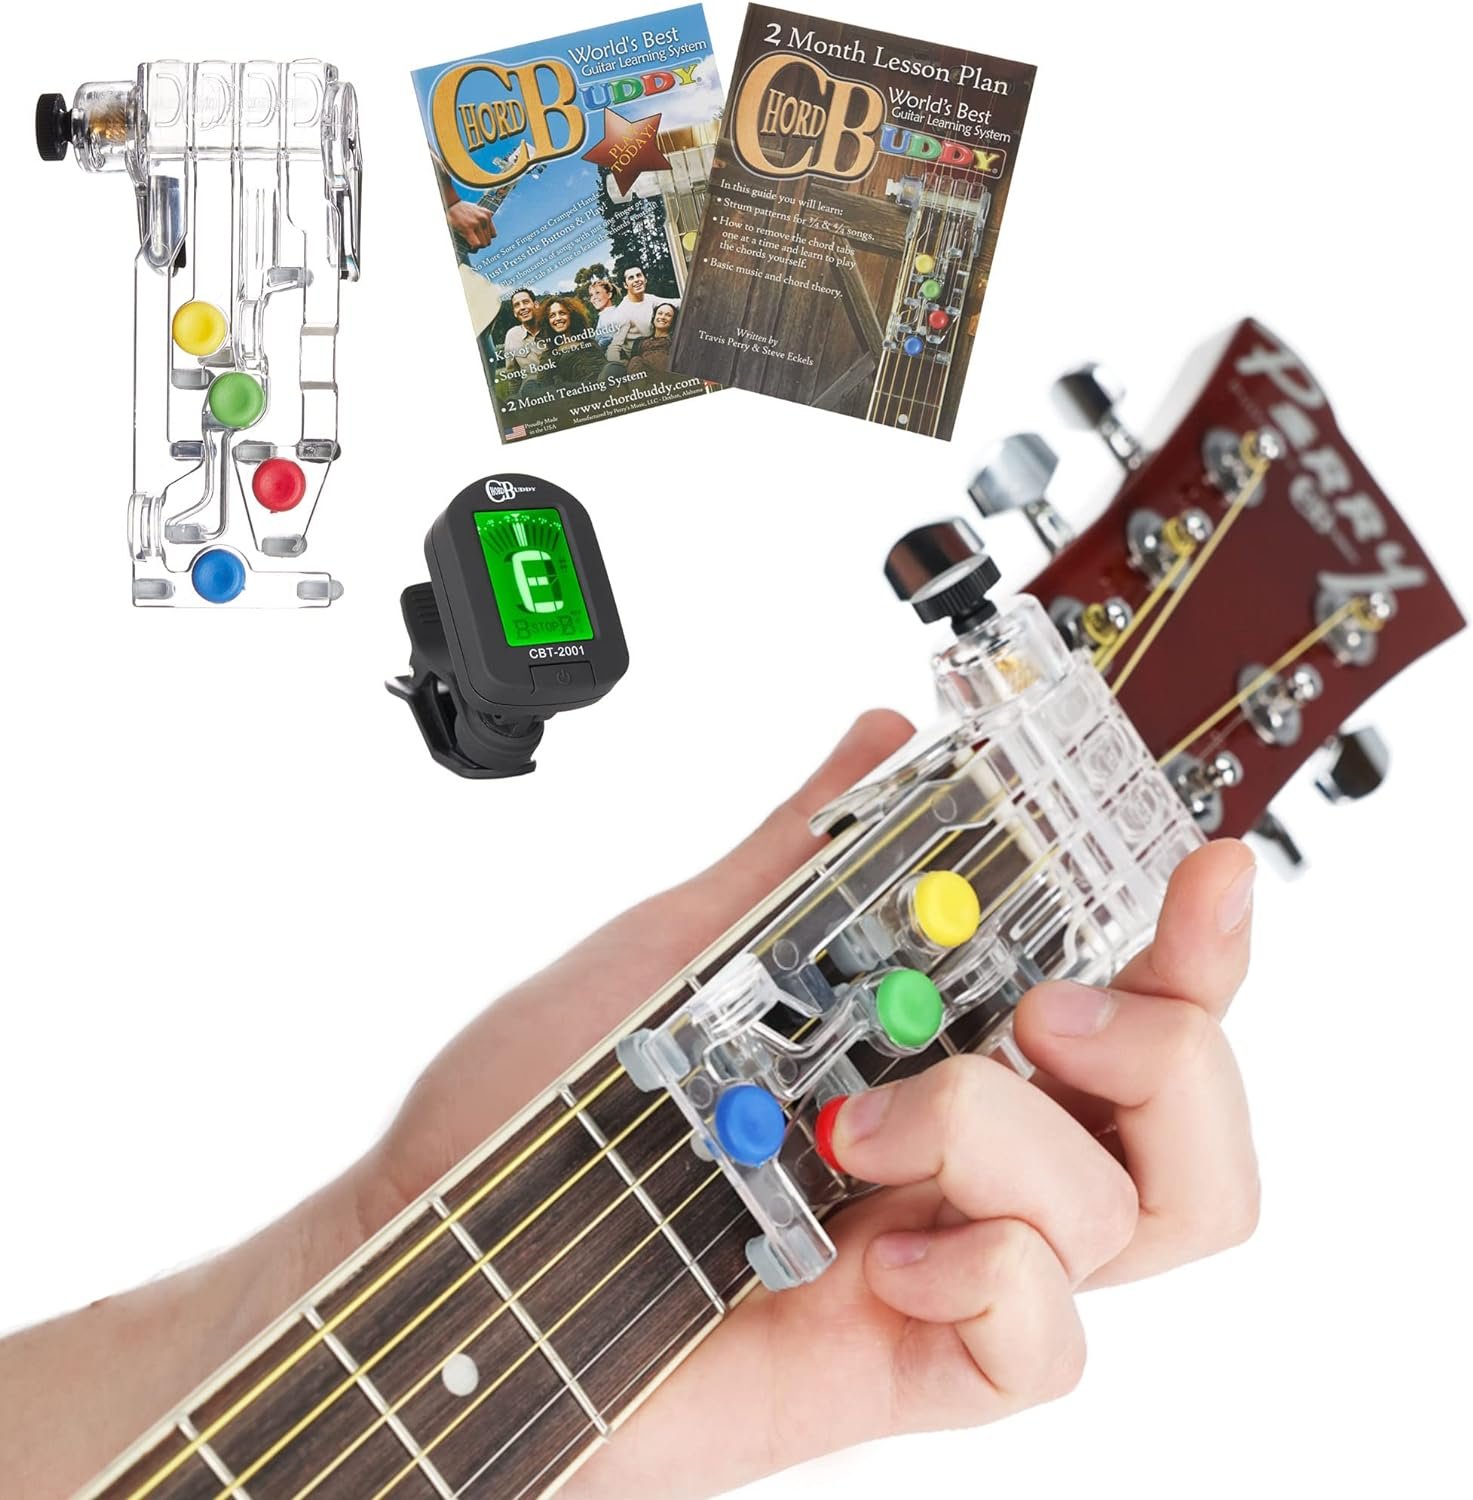 ChordBuddy “MADE IN THE USA” - Guitar Learning with Songbook, Lesson Plan, App, Right Handed ChordBuddy, and Tuner- for Acoustic Guitars only